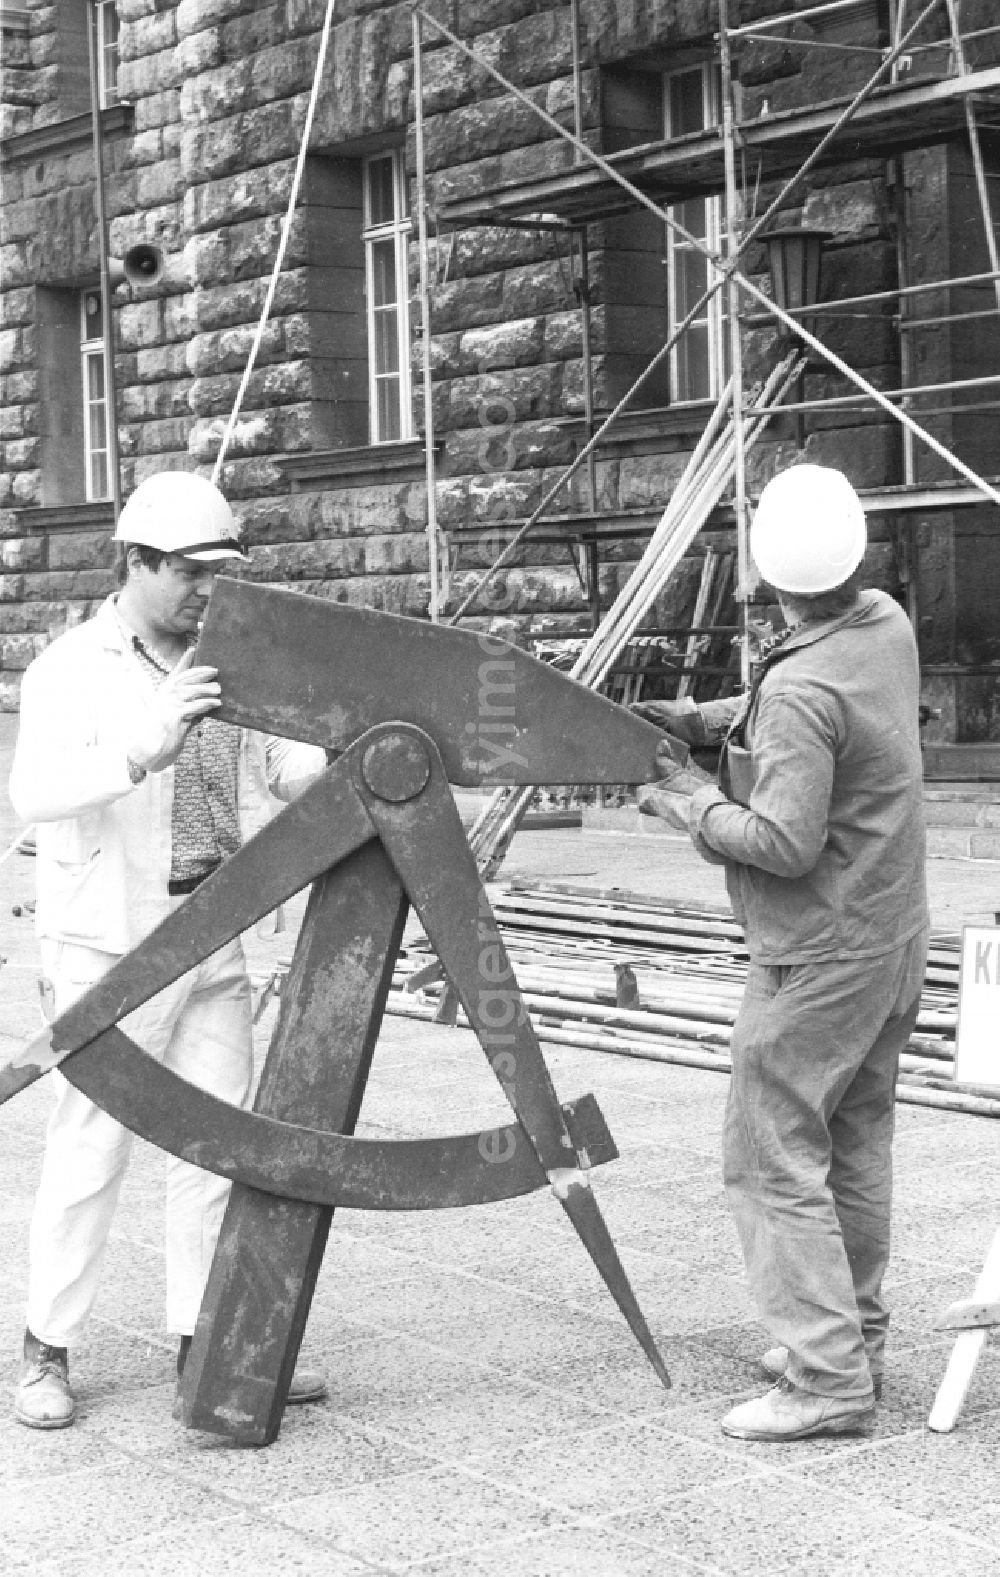 GDR image archive: Berlin - Dismantling of the GDR symbol, consisting of a hammer and compass, from the facade of the Berliner Stadthaus (Former Council of Ministers of the GDR) in Berlin-Mitte, the former capital of the GDR, German Democratic Republic